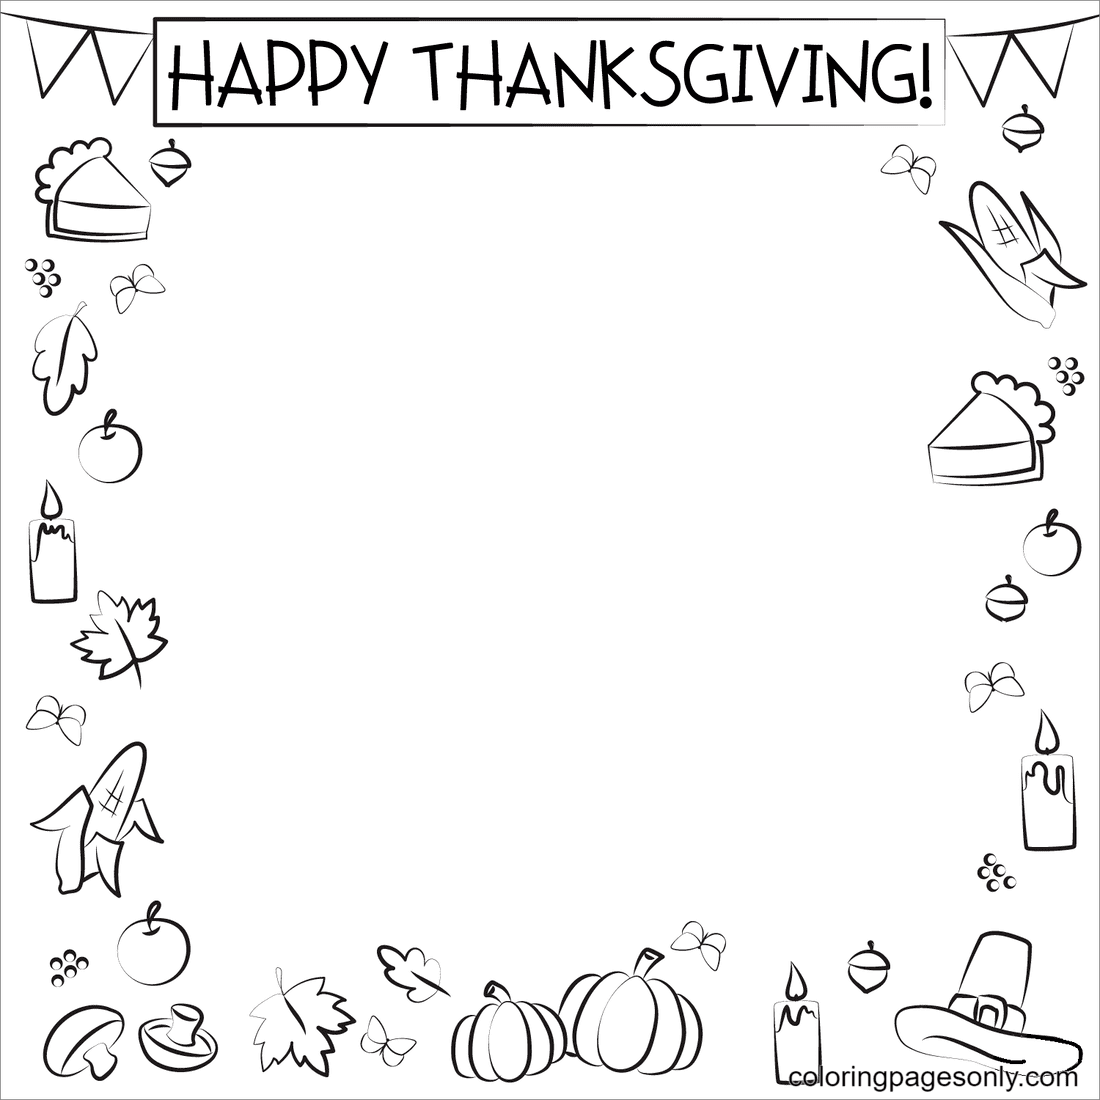 Thanksgiving Border Coloring Page